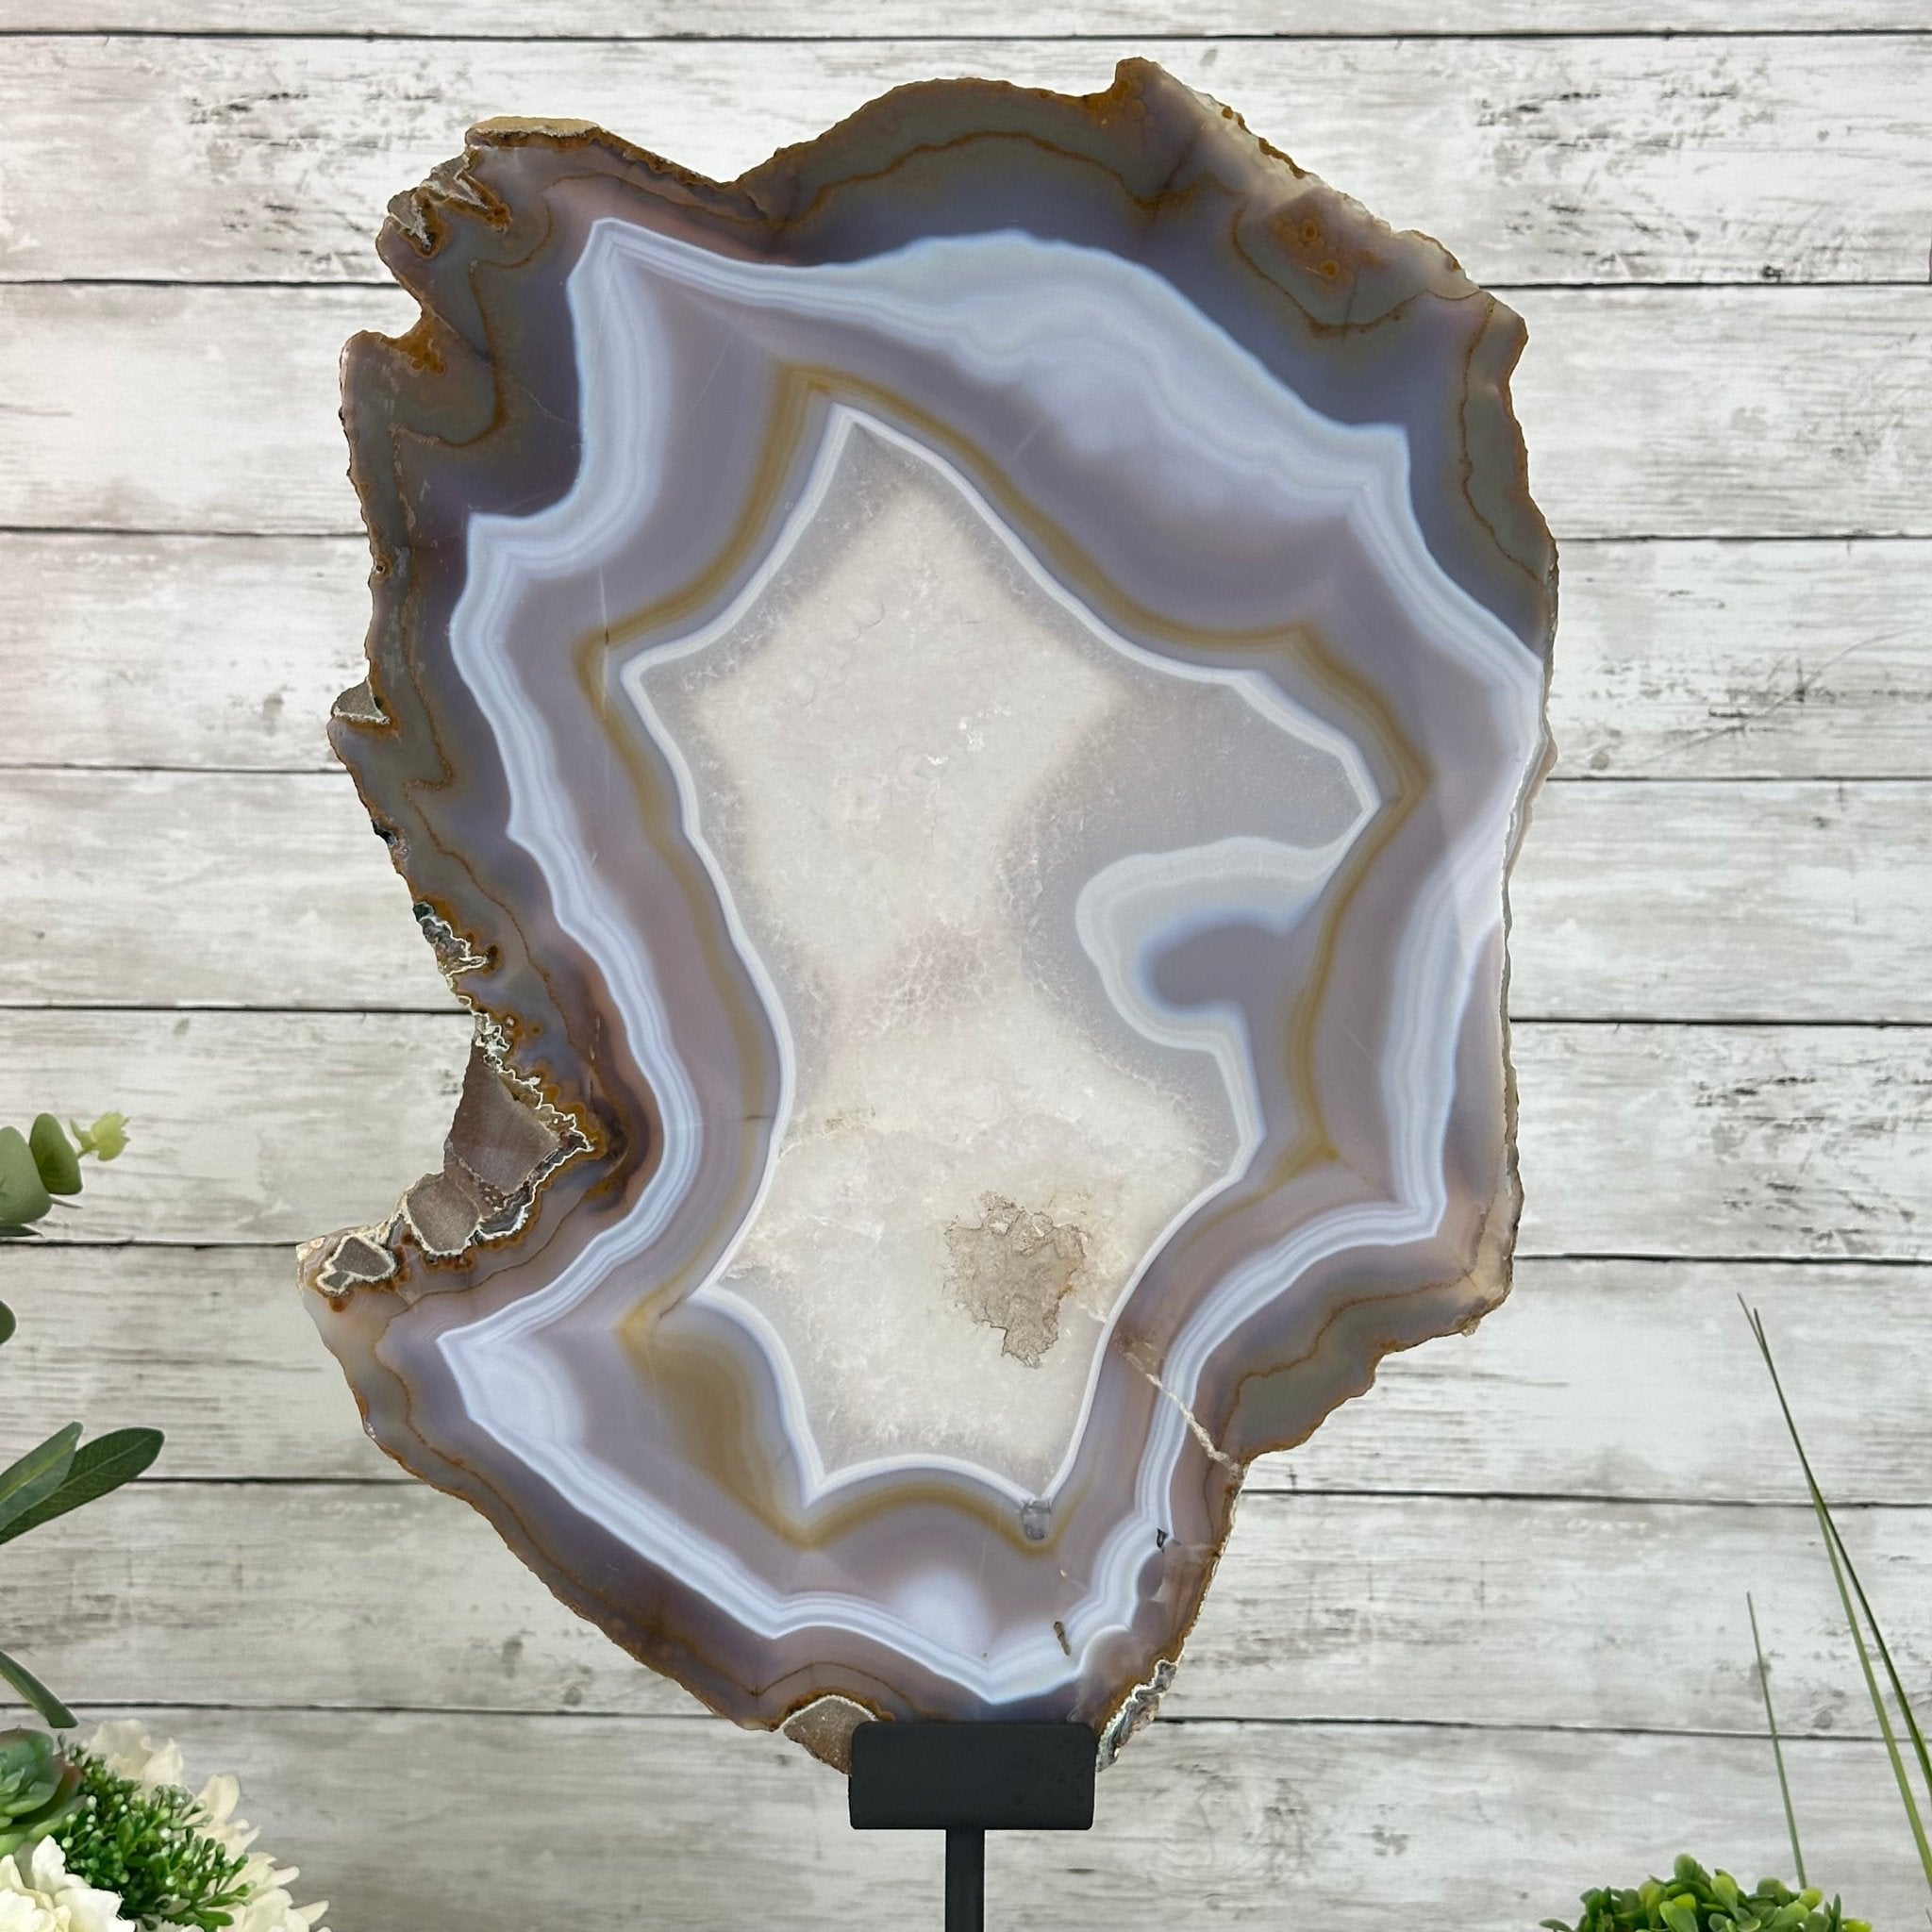 Special Large Natural Brazilian Agate Slice on a Metal Stand, 24.7" Tall #5056-0040 - Brazil GemsBrazil GemsSpecial Large Natural Brazilian Agate Slice on a Metal Stand, 24.7" Tall #5056-0040Slices on Fixed Bases5056-0040